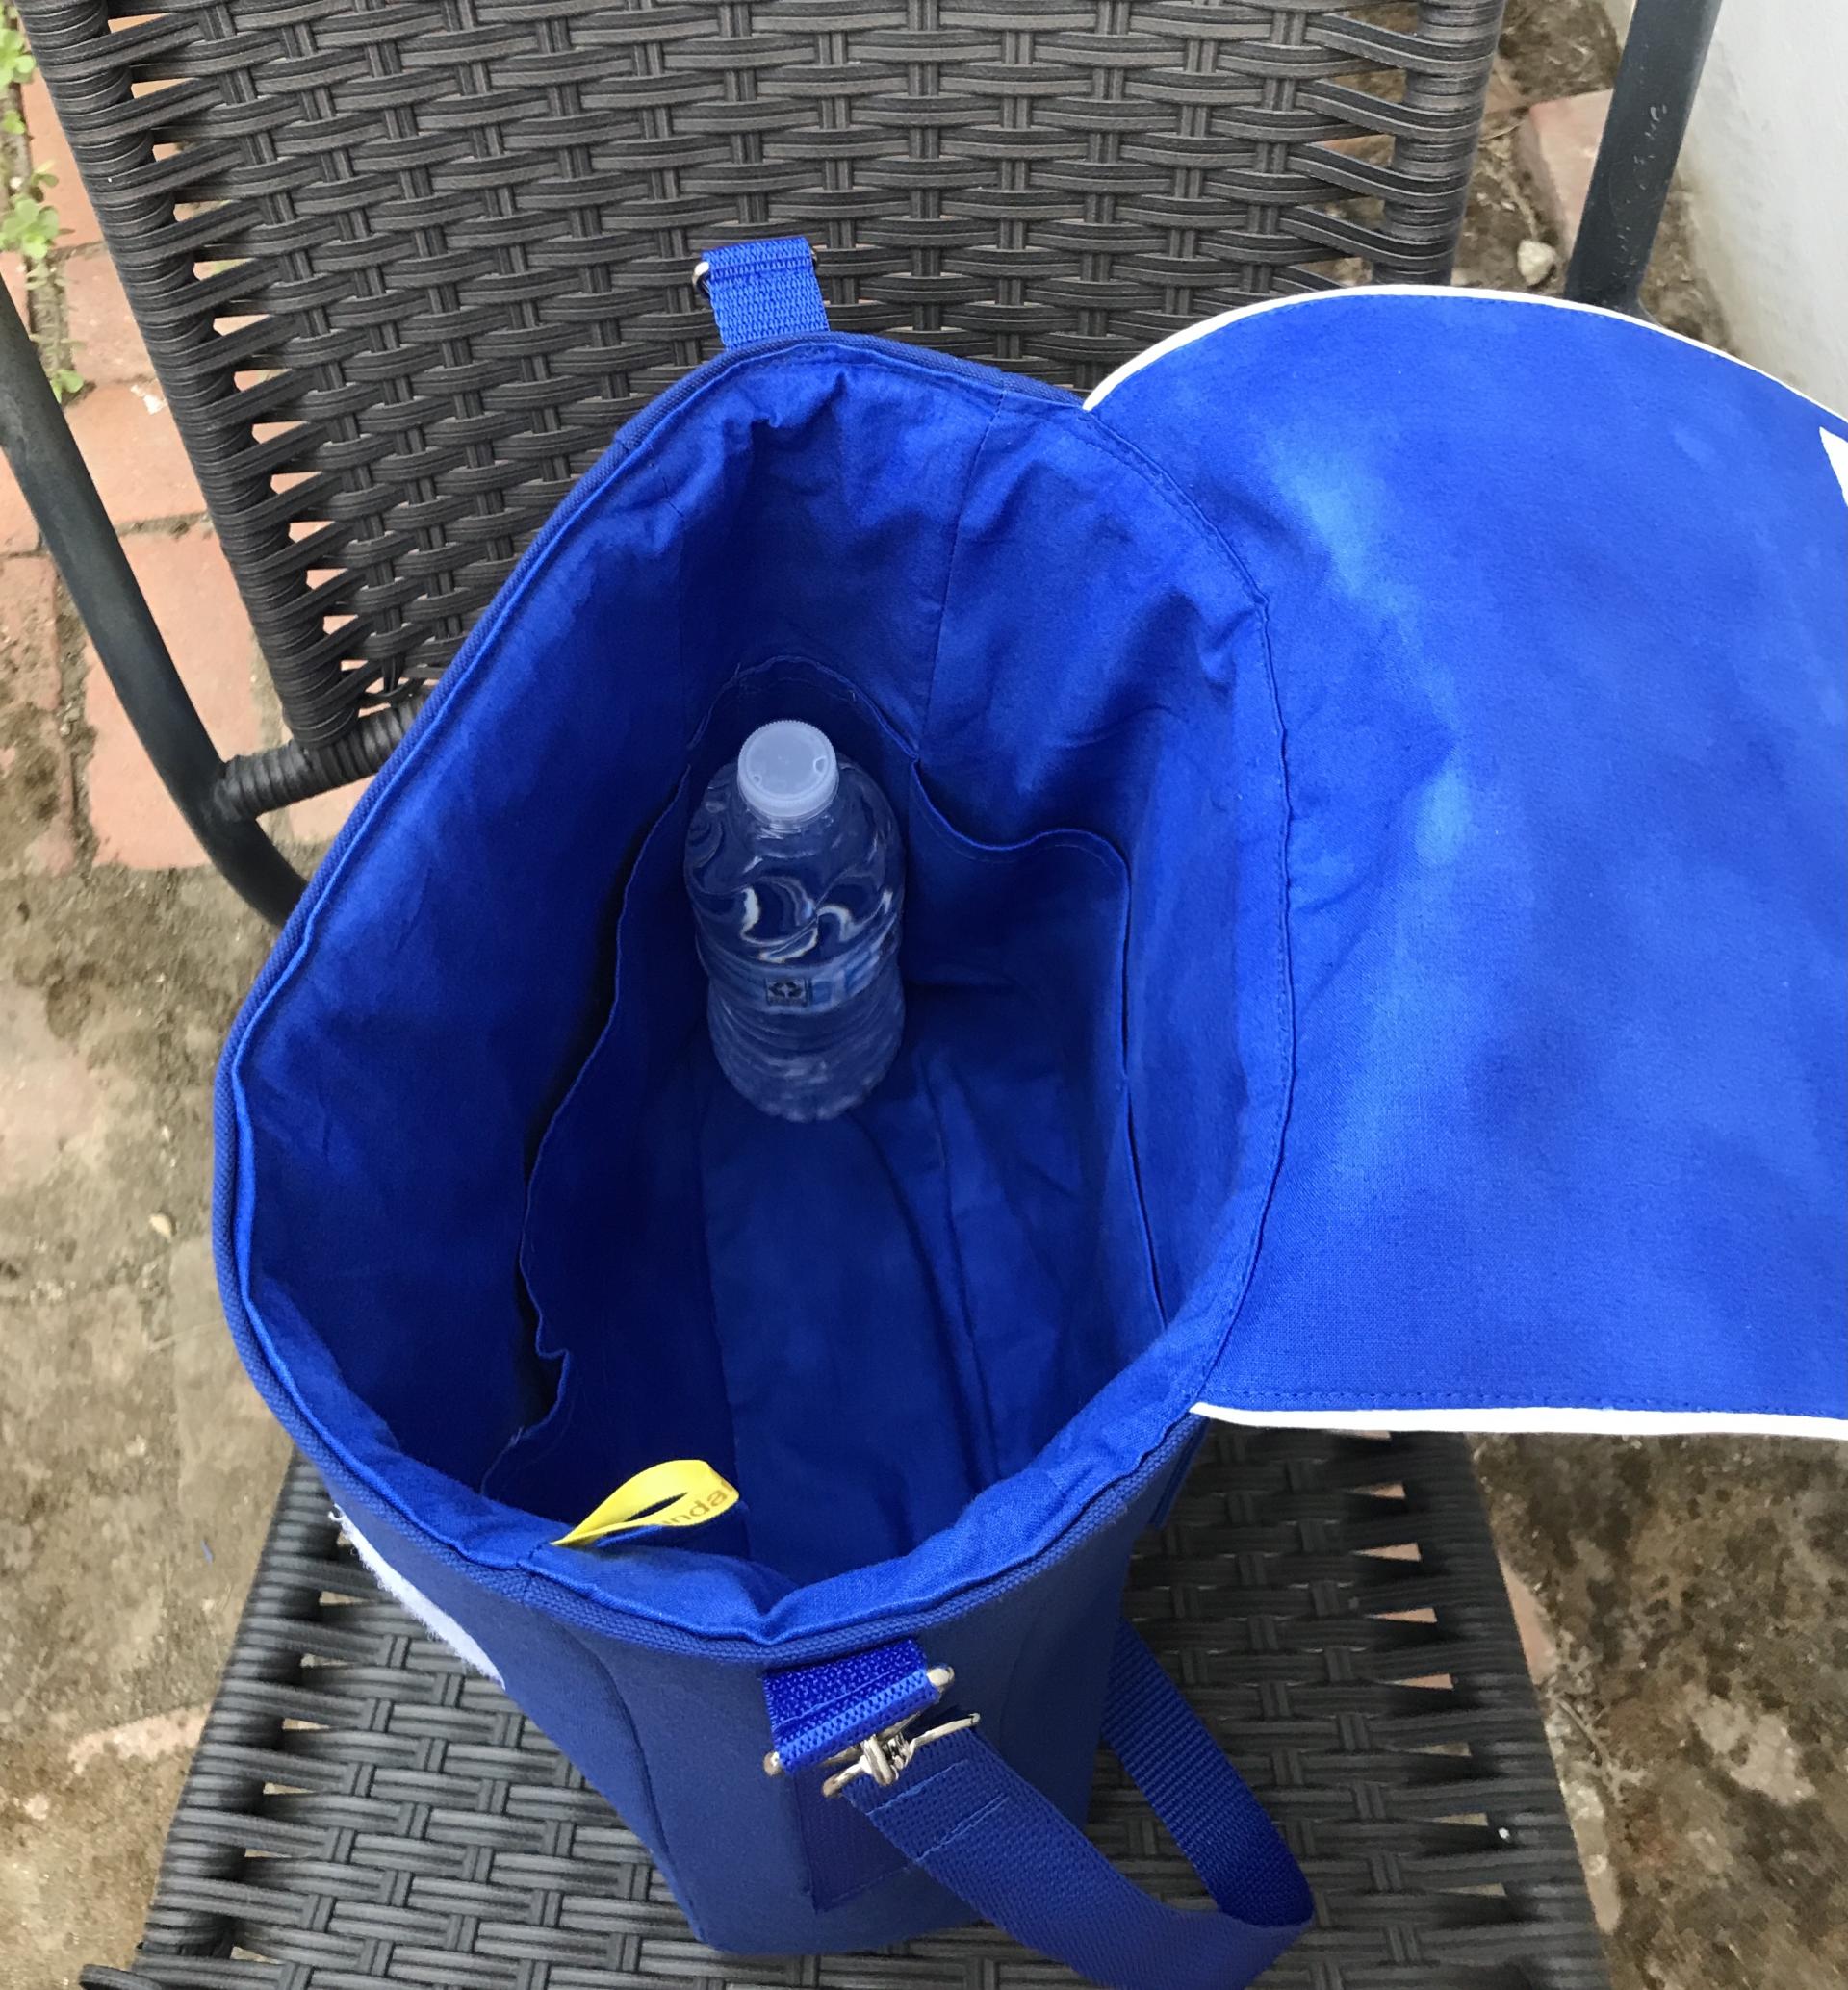 Water bottle (not included) to show size of bag